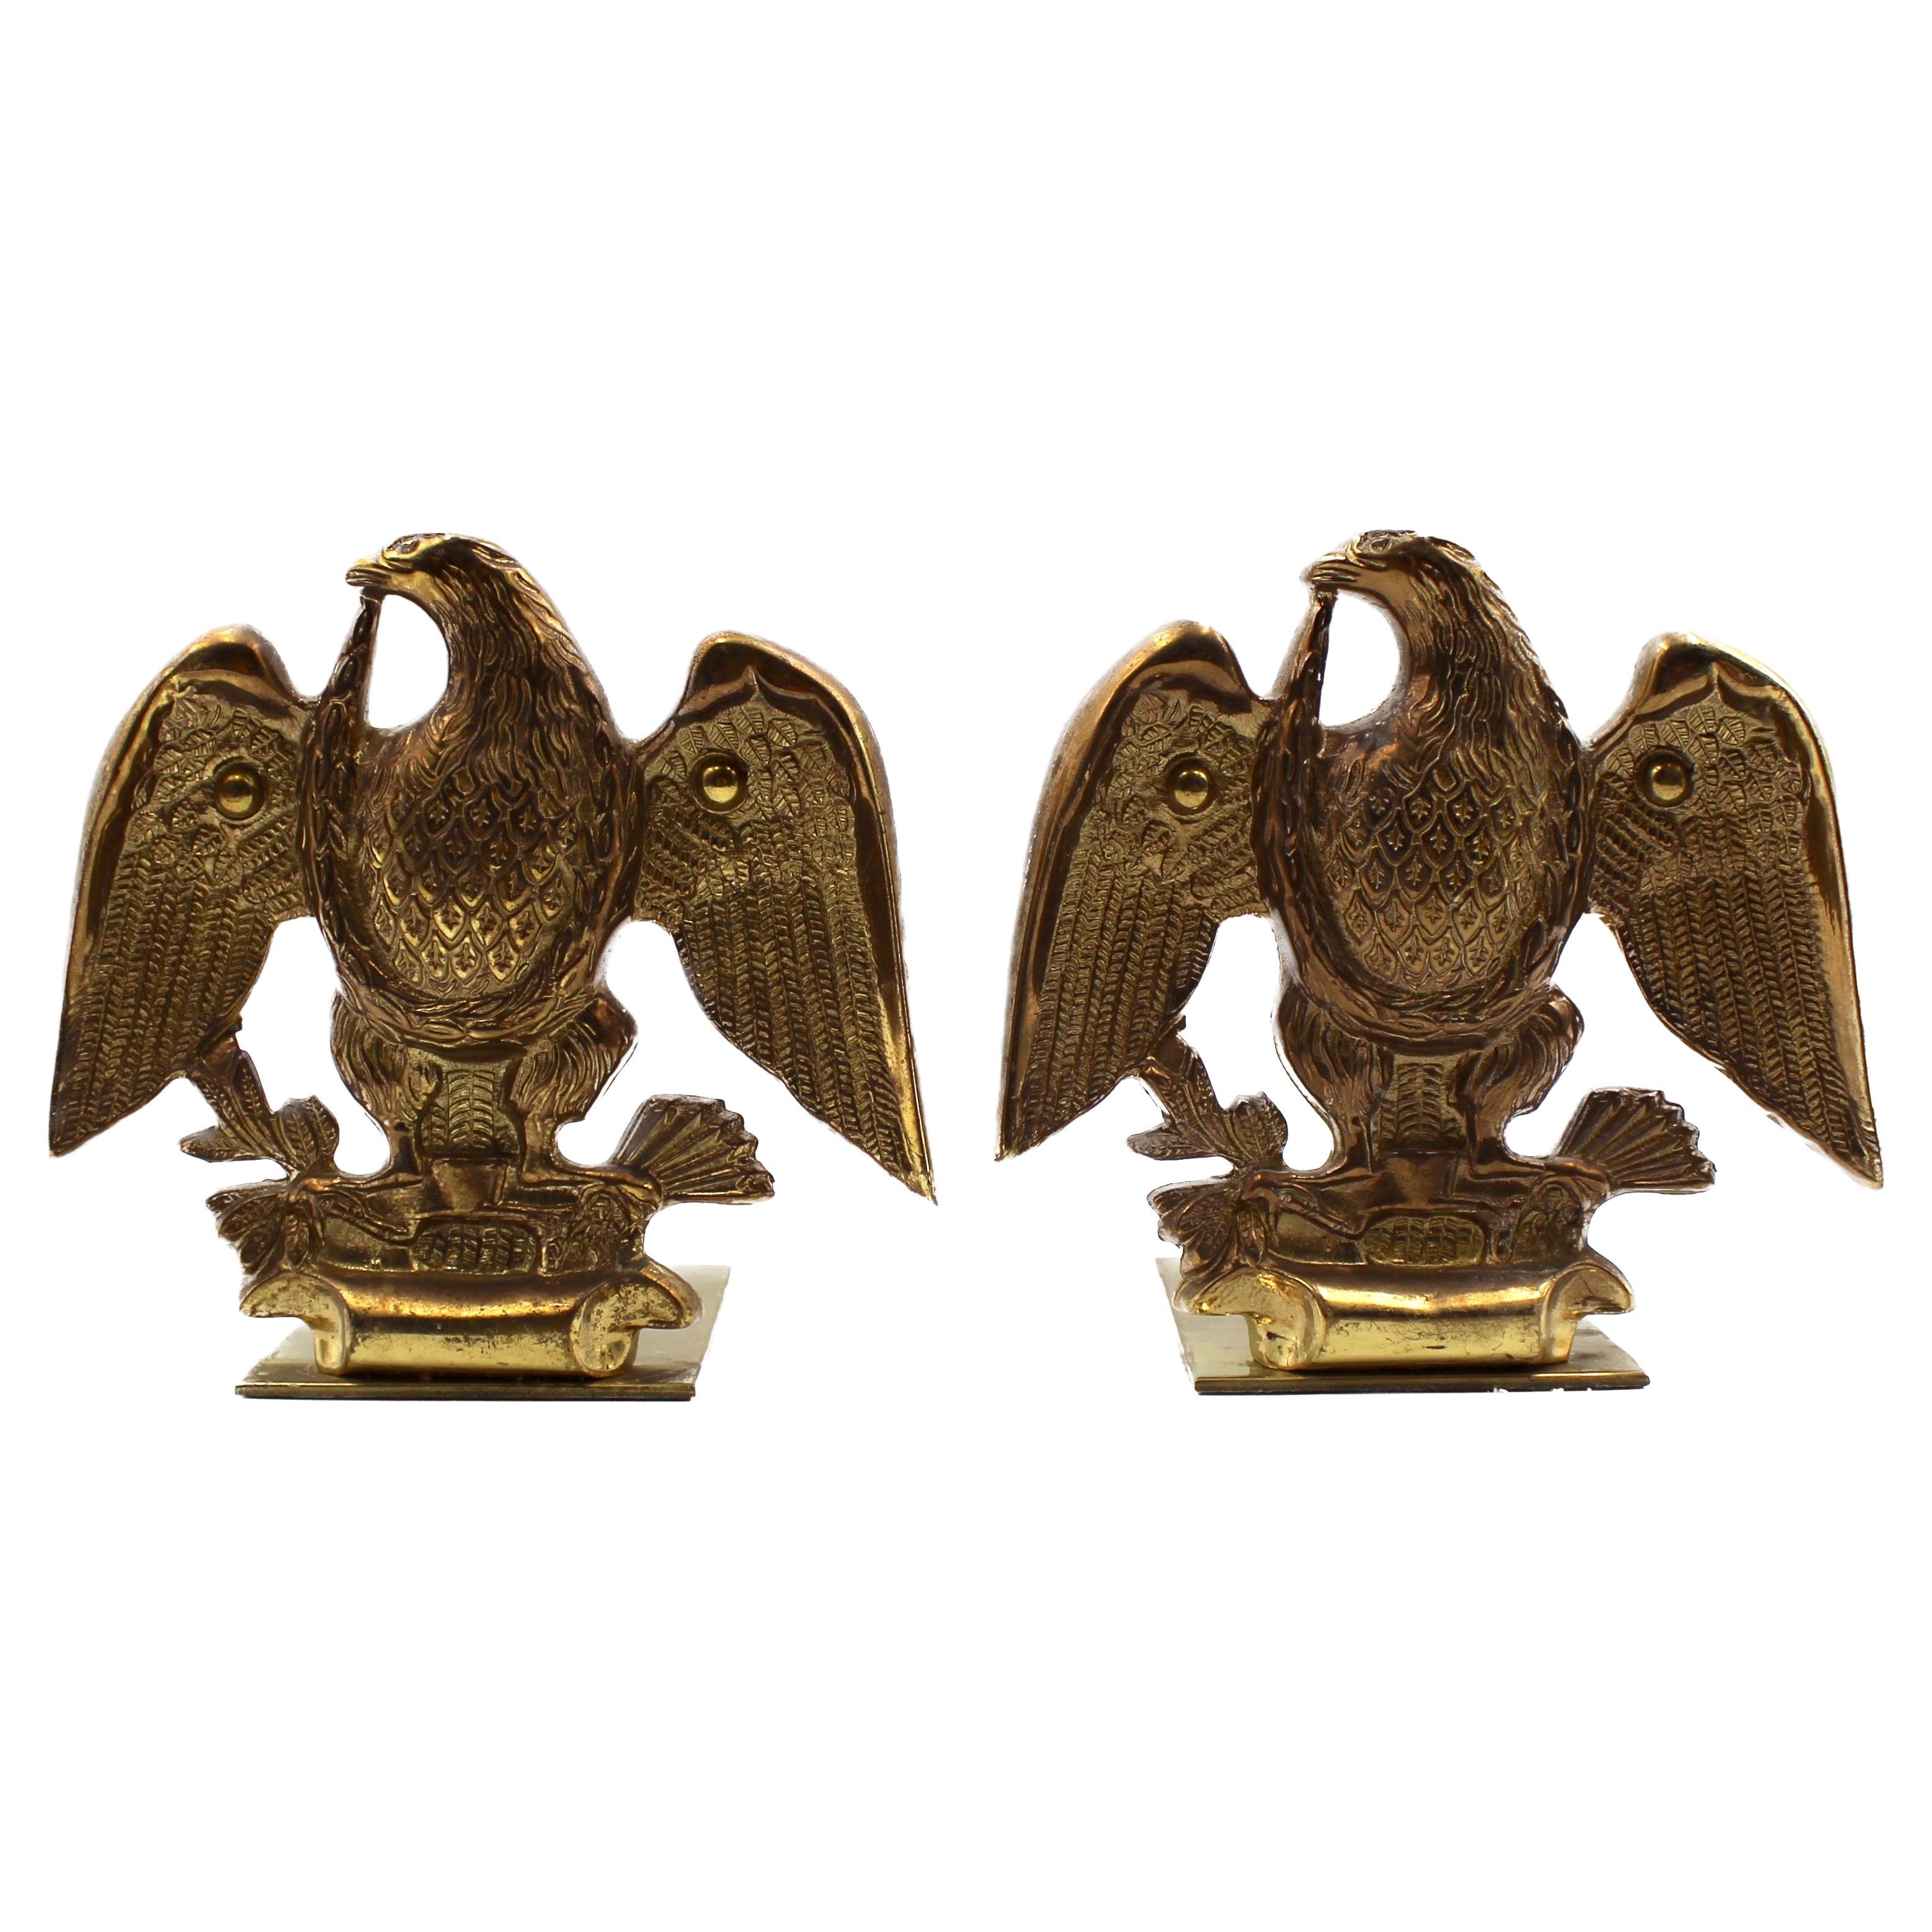 Vintage American Eagle Bookends by Baldwin Brass